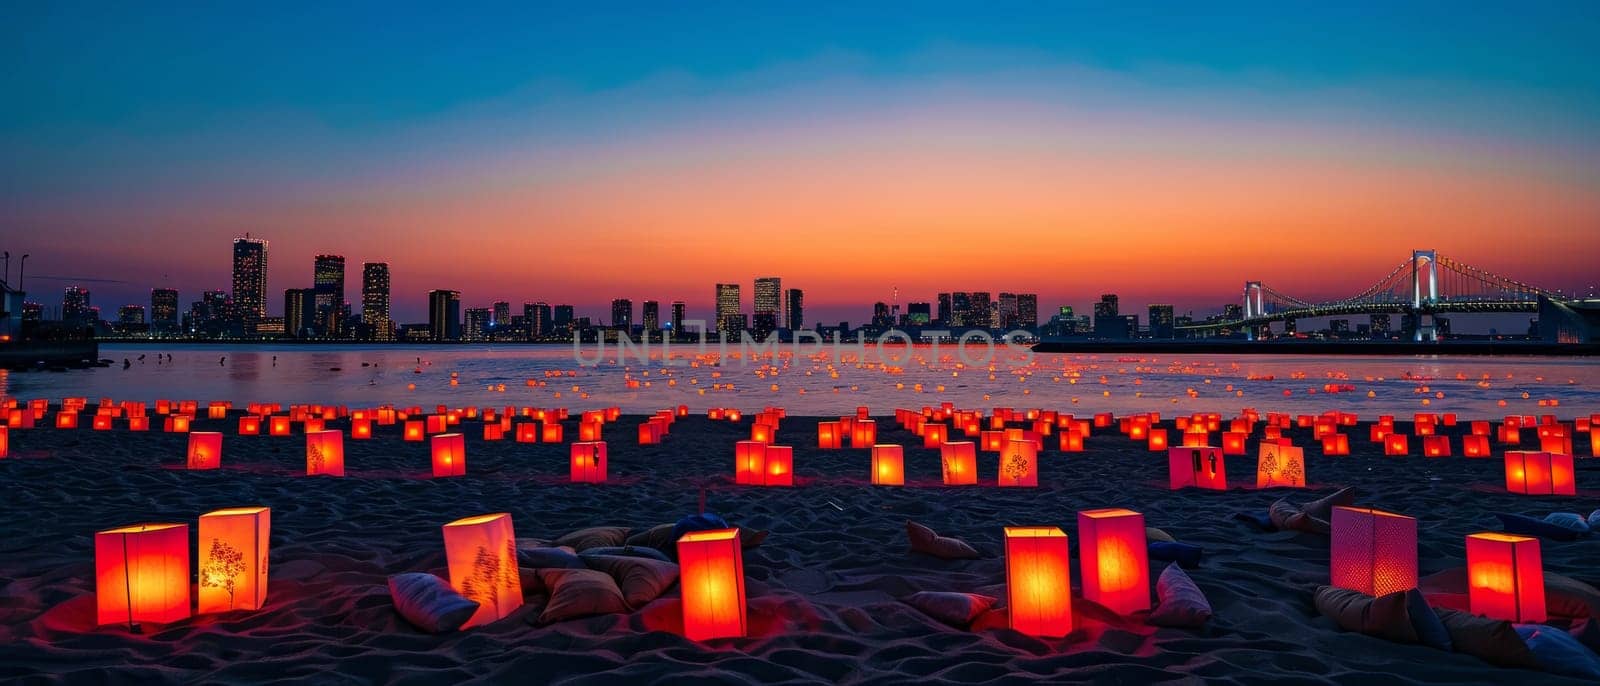 Warm hues of sunset sky blend with the cityscape and illuminated paper lanterns on the beach, commemorating Marine Day with a picturesque seascape. Japanese Umi no Hi known as Ocean Day or Sea Day by sfinks